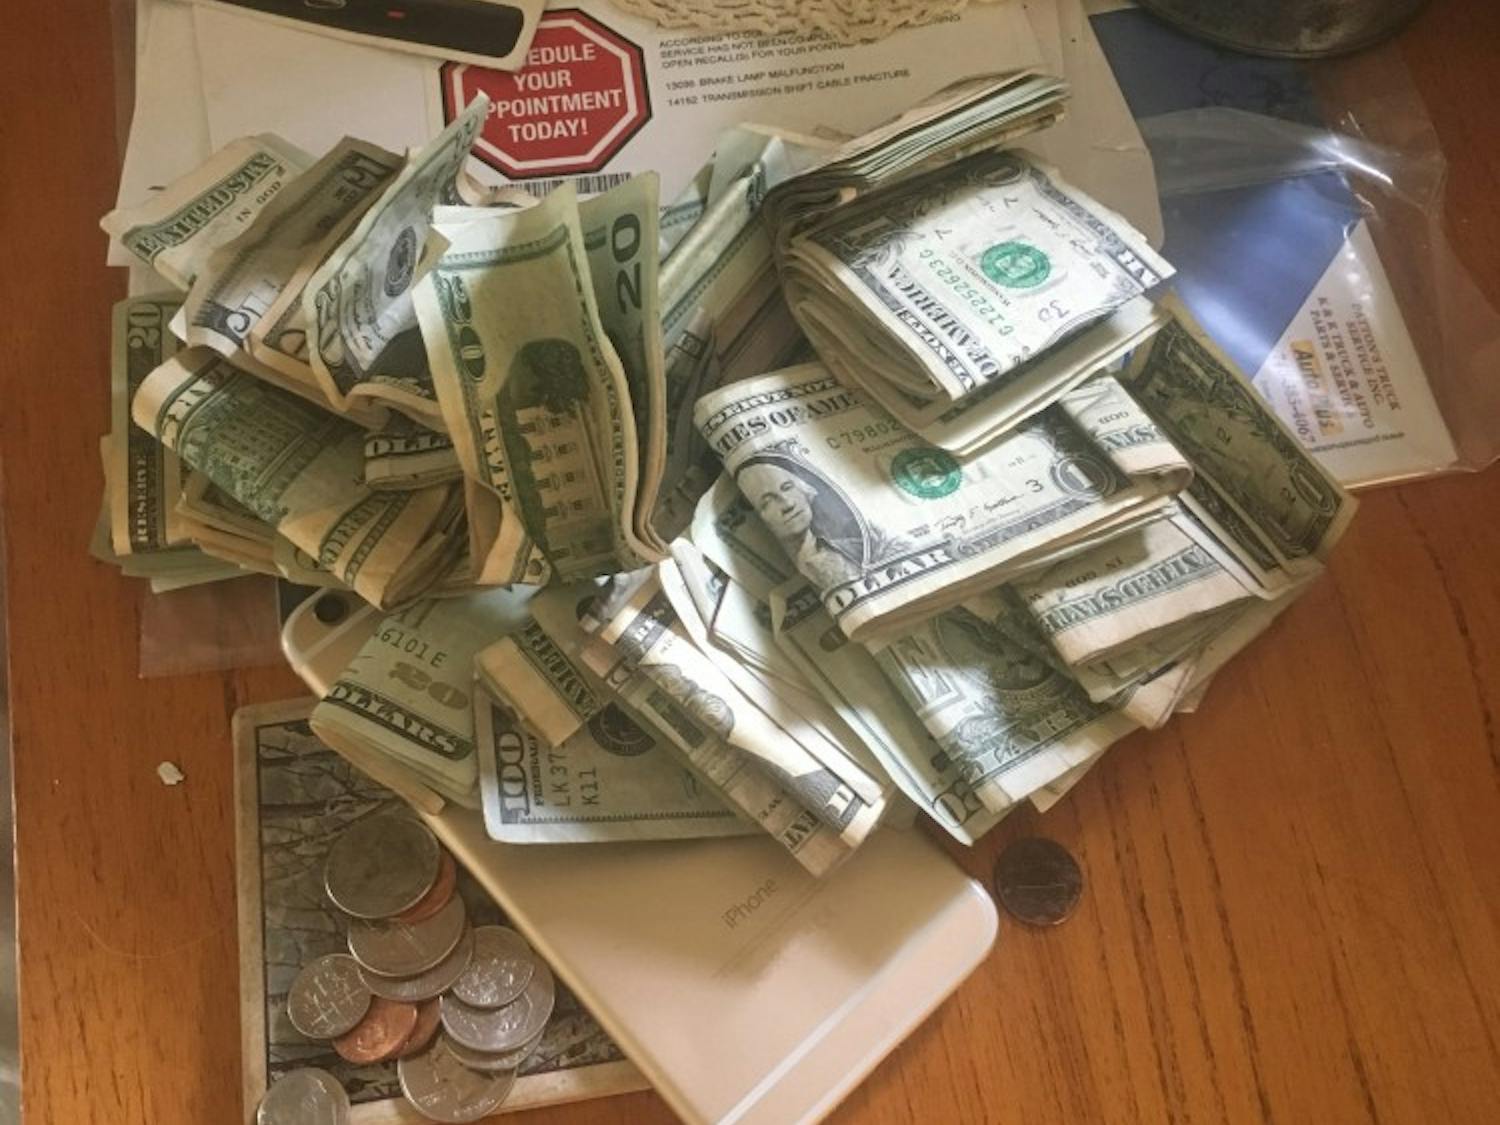 The Athens Major Crimes Unit&nbsp;found digital scales, drug paraphernalia and more than $2,000 in cash Sunday&nbsp;at&nbsp;17 James Lane, The Plains. (provided via the Athens Major Crimes Unit)